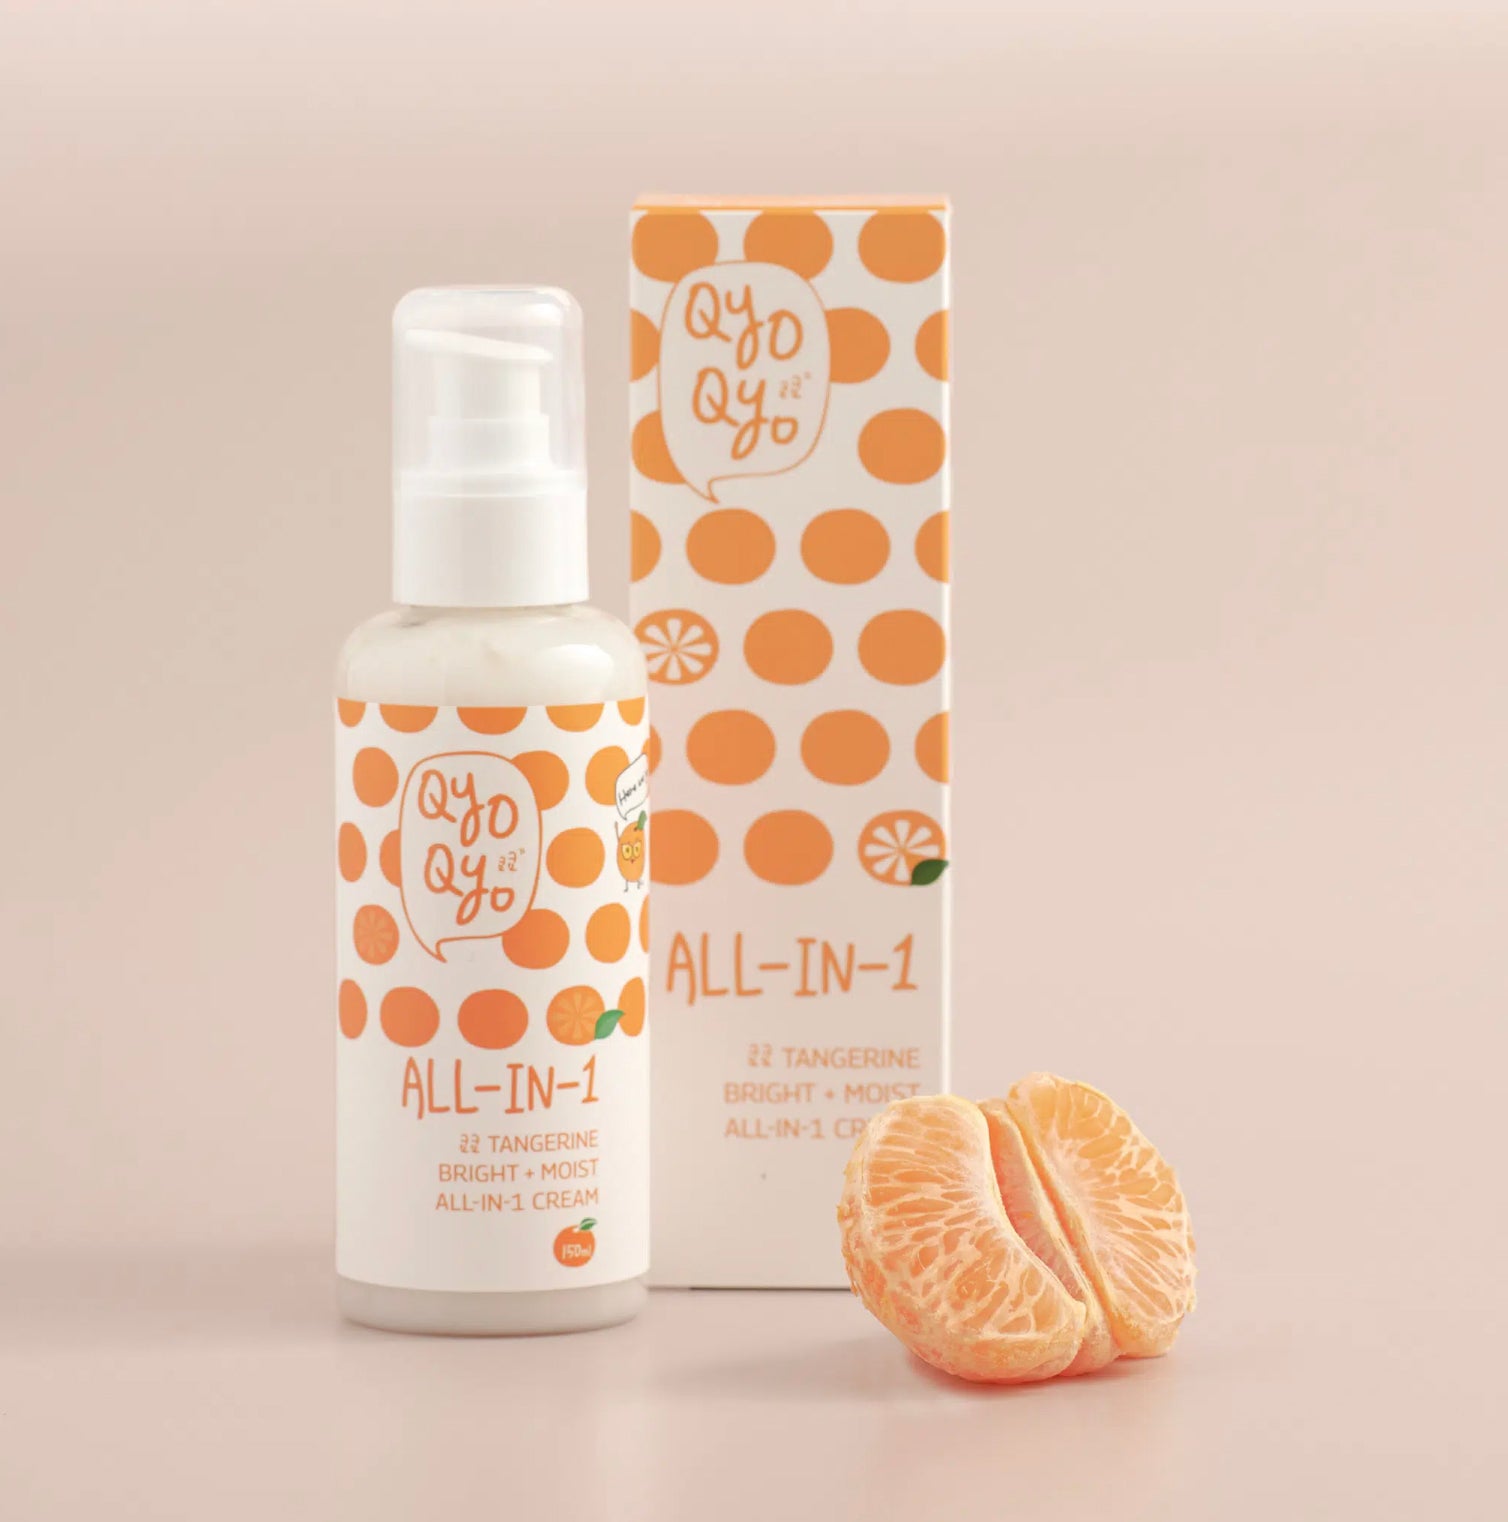 Qyoqyo Tangerine Bright and Moist All In One Cream